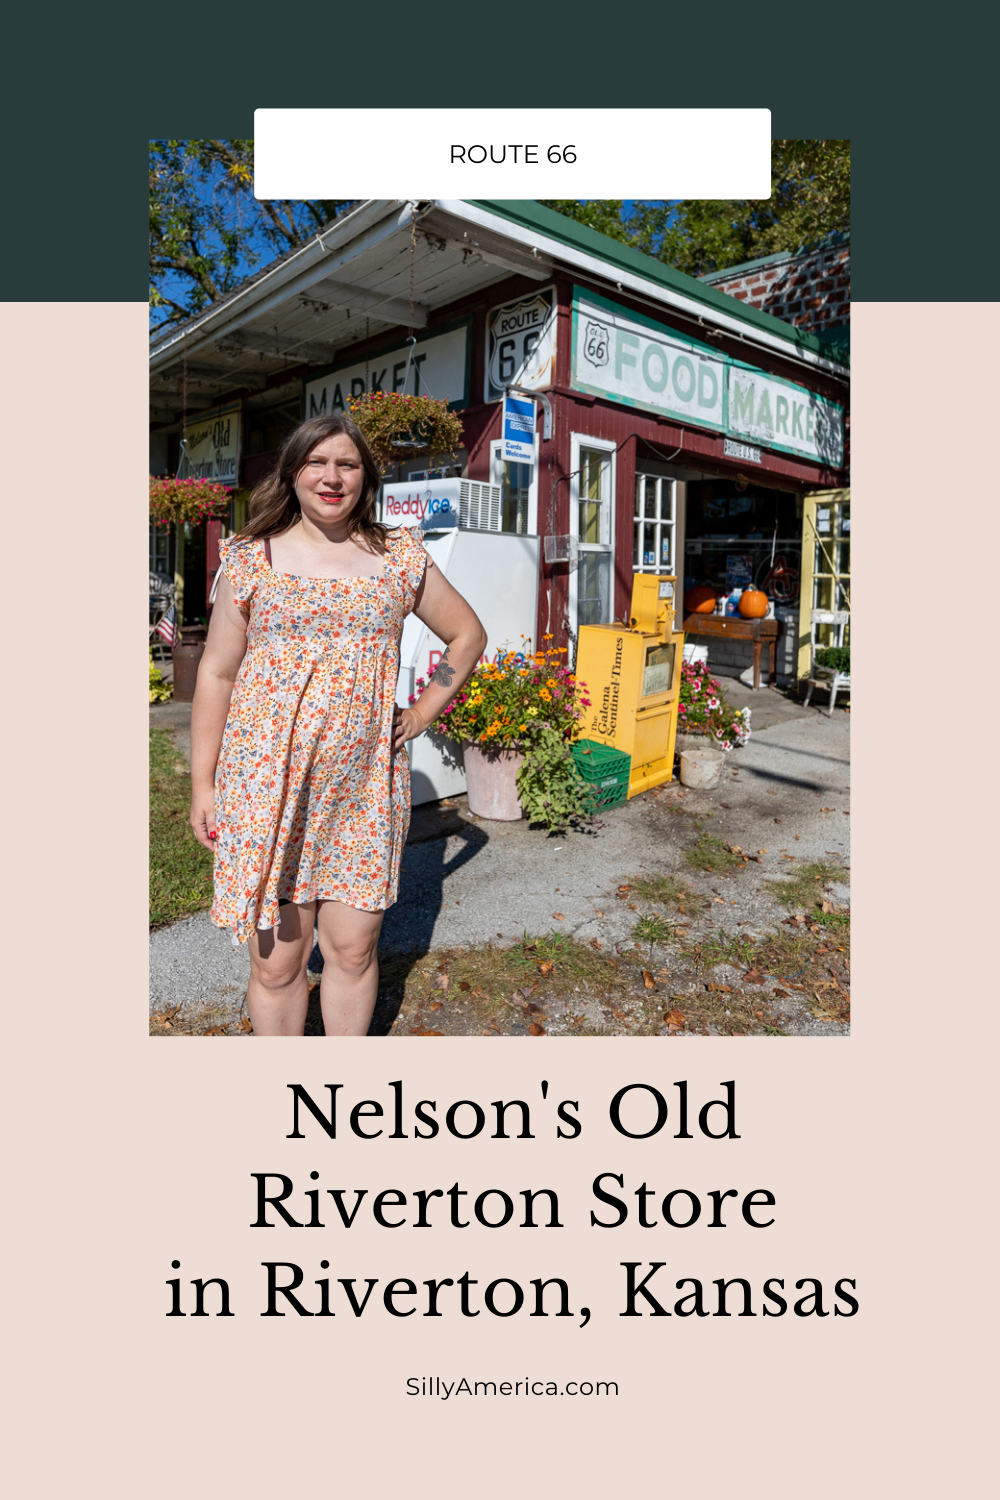 Nelson's Old Riverton Store in Riverton, Kansas (AKA The Eisler Brothers Old Riverton Store) is a Route 66 institution that predates the Mother Road itsels.  #RoadTrips #RoadTripStop #Route66 #Route66RoadTrip #KansasRoute66 #Kansas #KansasRoadTrip #KansasRoadsideAttractions #RoadsideAttractions #RoadsideAttraction #RoadsideAmerica #RoadTrip